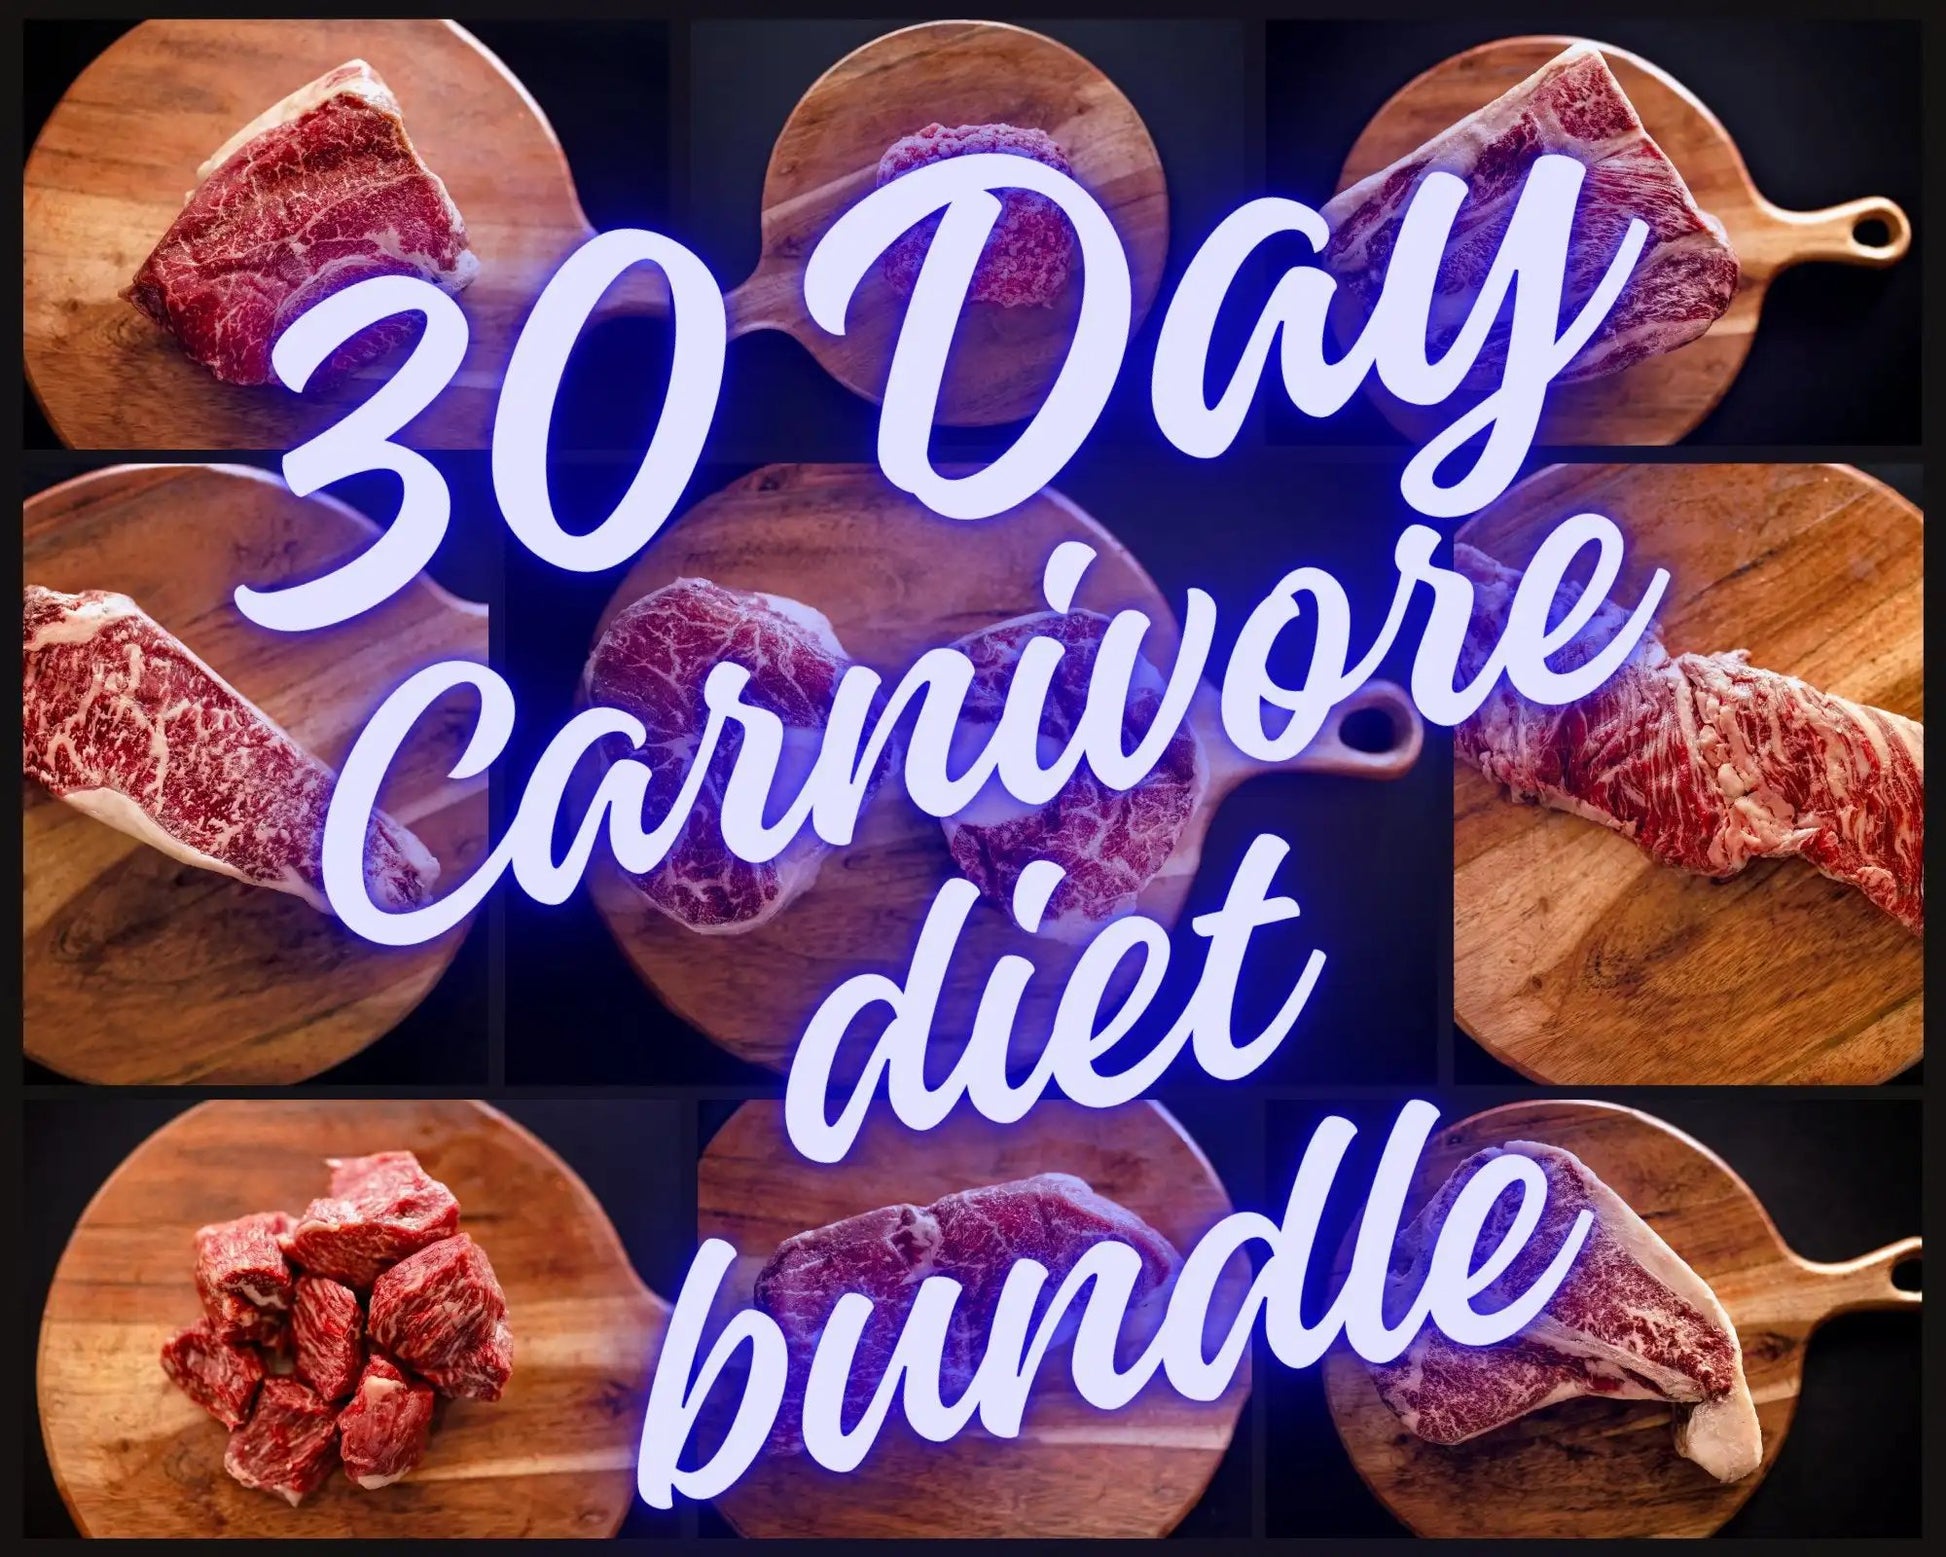 30 Day Carnivore Diet Meal Plan Bundle - The Hufeisen-Ranch (WYO Wagyu)